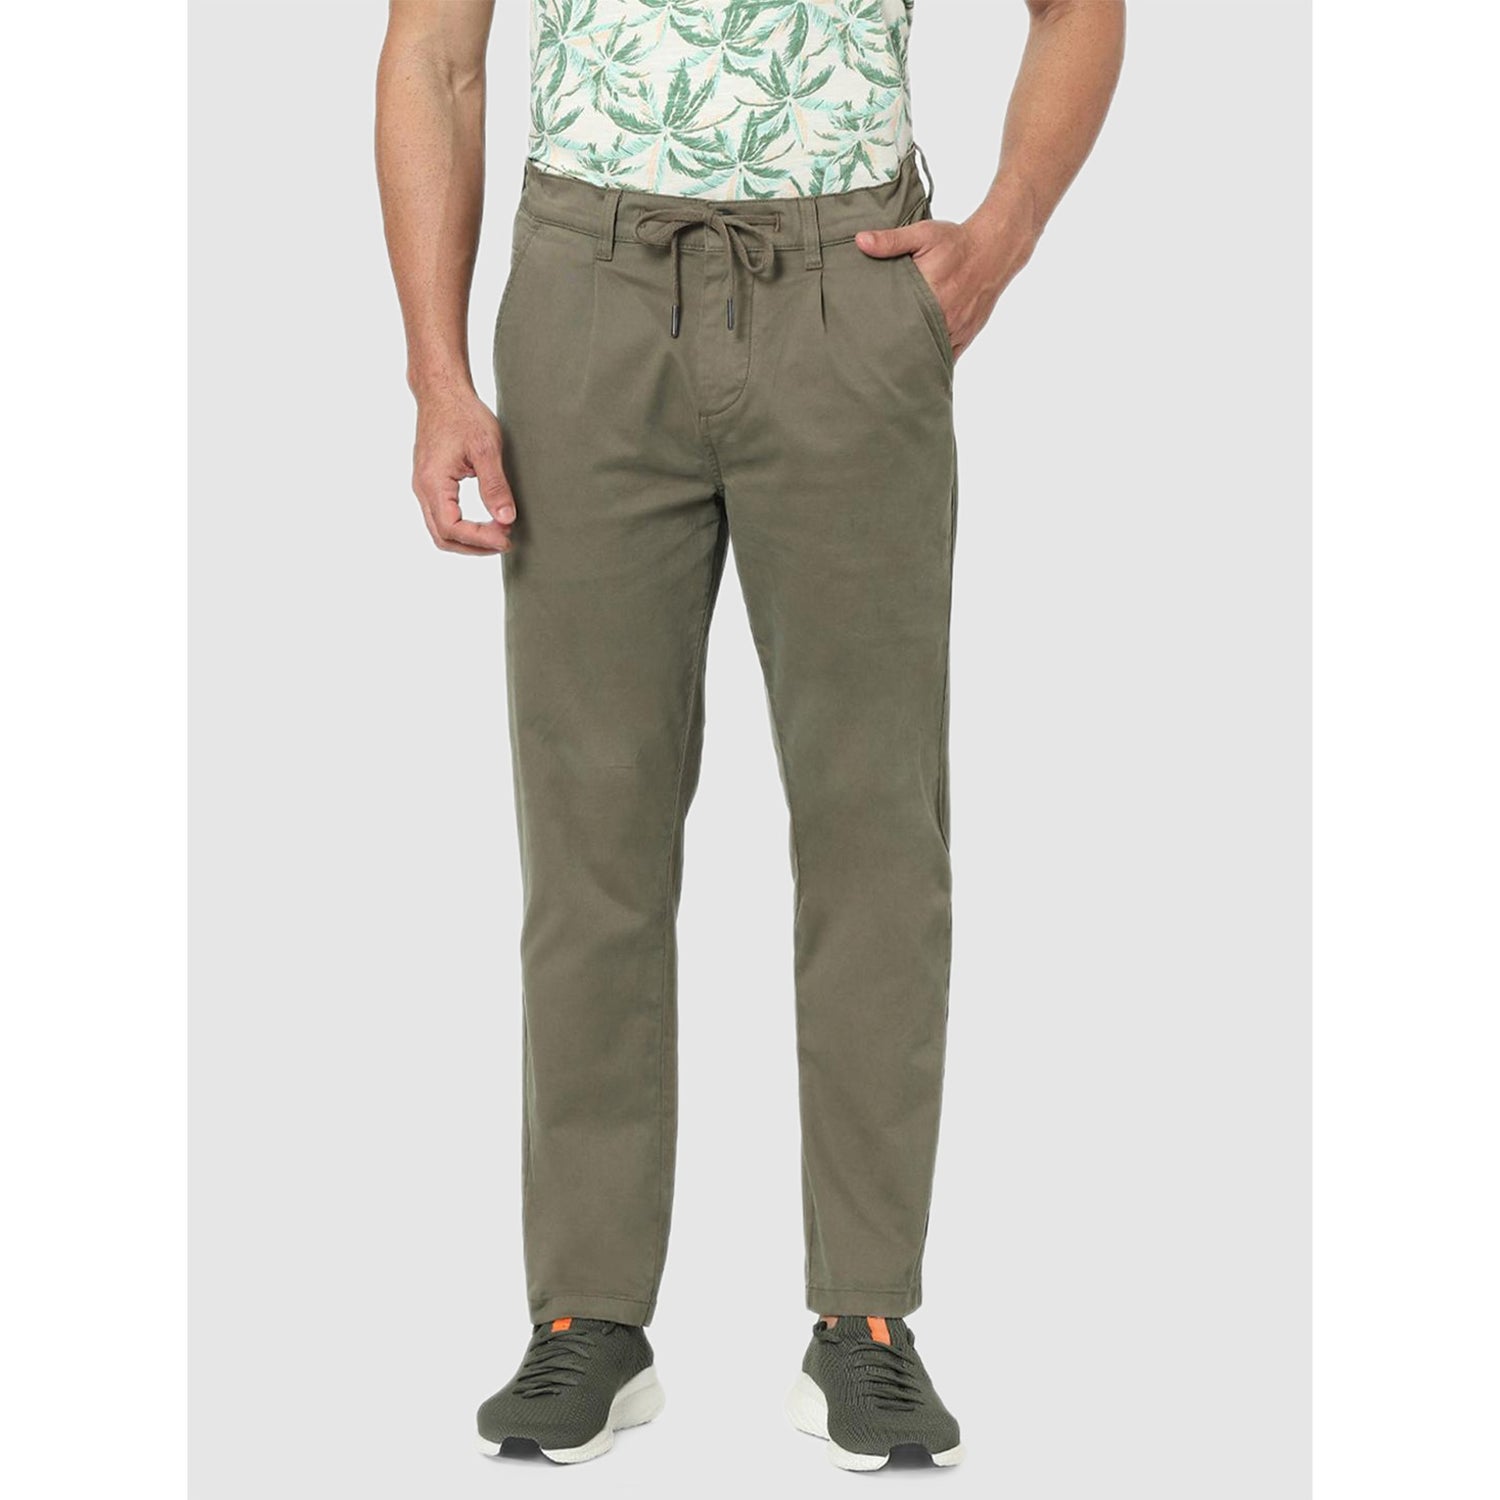 Olive Green Pleated Cotton Chinos Trousers (COCHICROP)